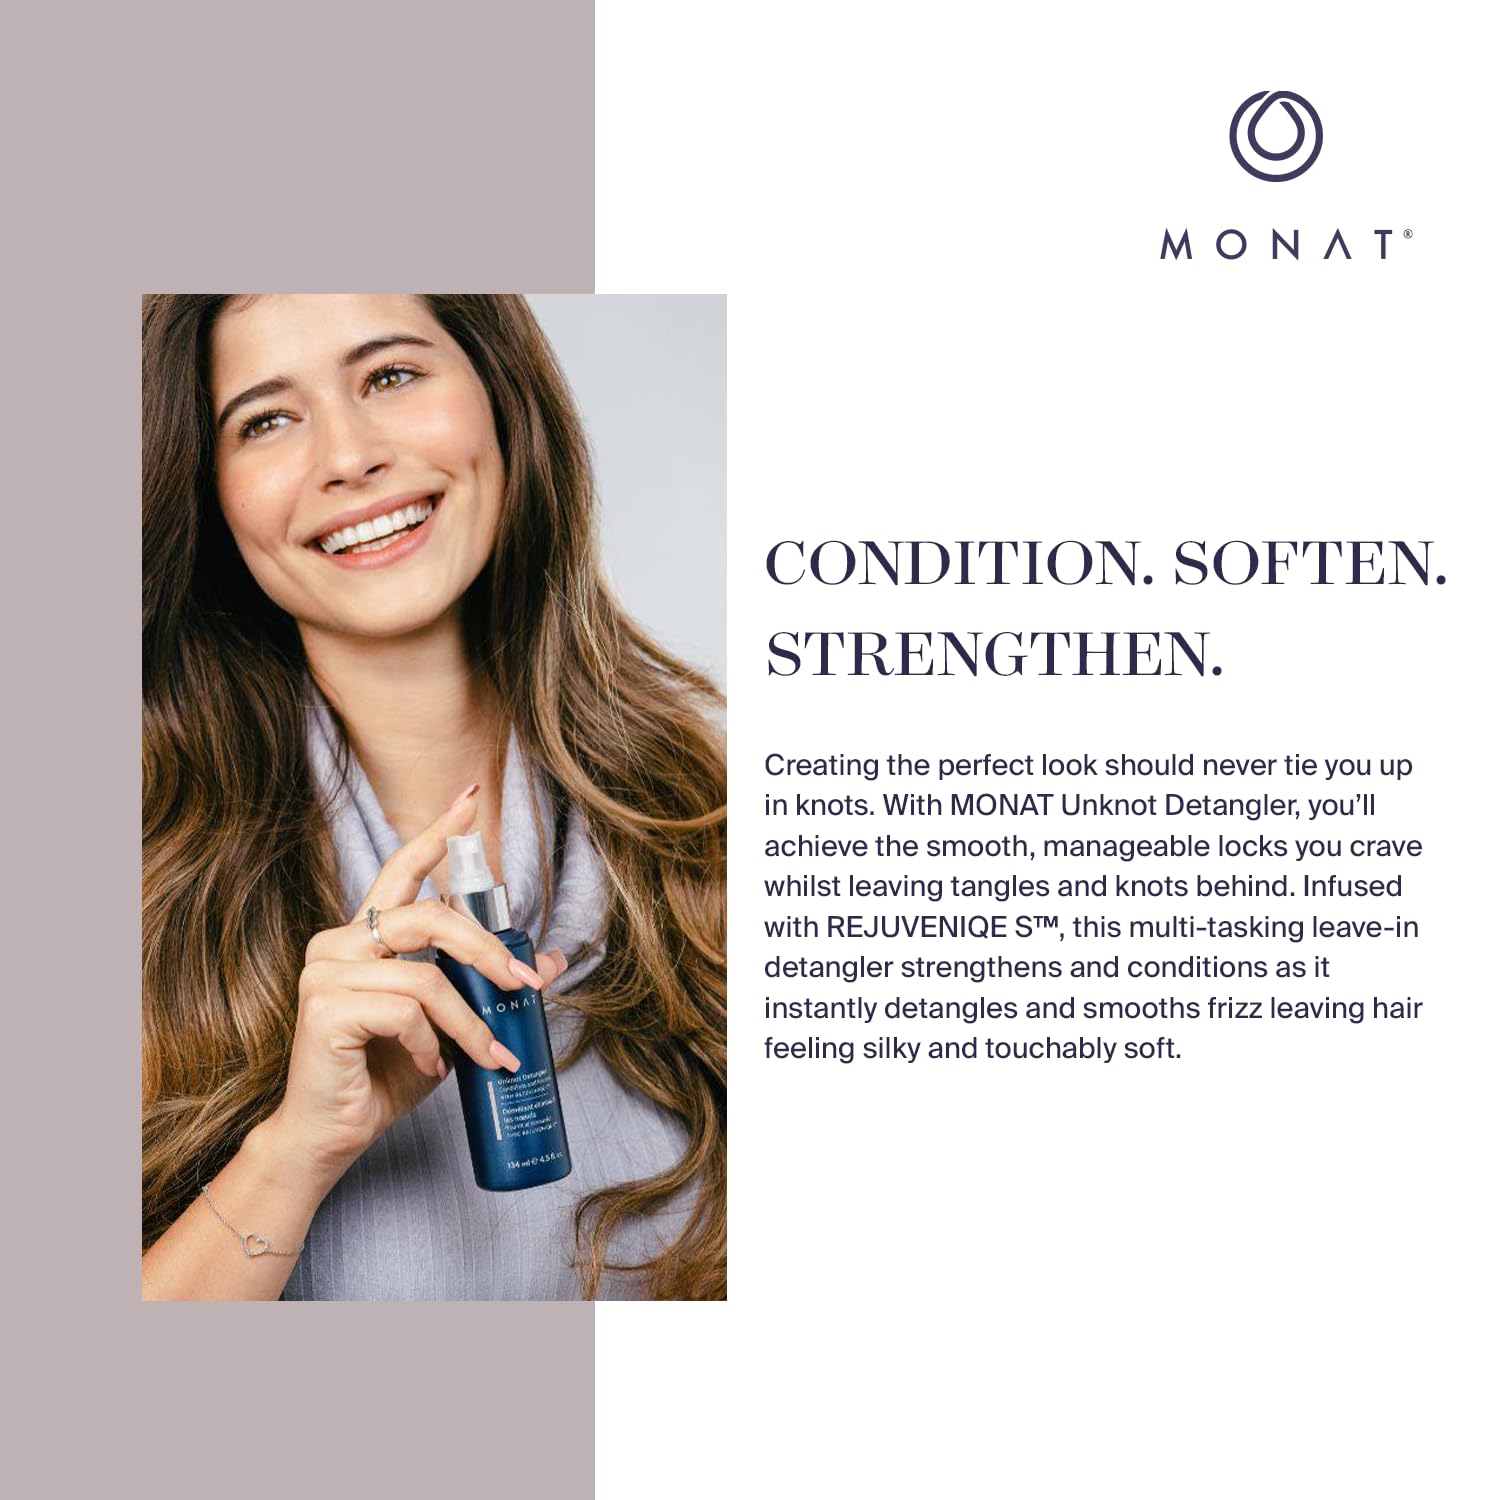 MONAT Unknot Detangler Infused with Rejuveniqe® S - Lightweight, Anti Frizz Hair Detangler Spray Leaving Strands Soft and Knot-free. Safe for Color-treated Hair. -Net Wt. 134 ml / 4.5 fl. oz. : Beauty & Personal Care